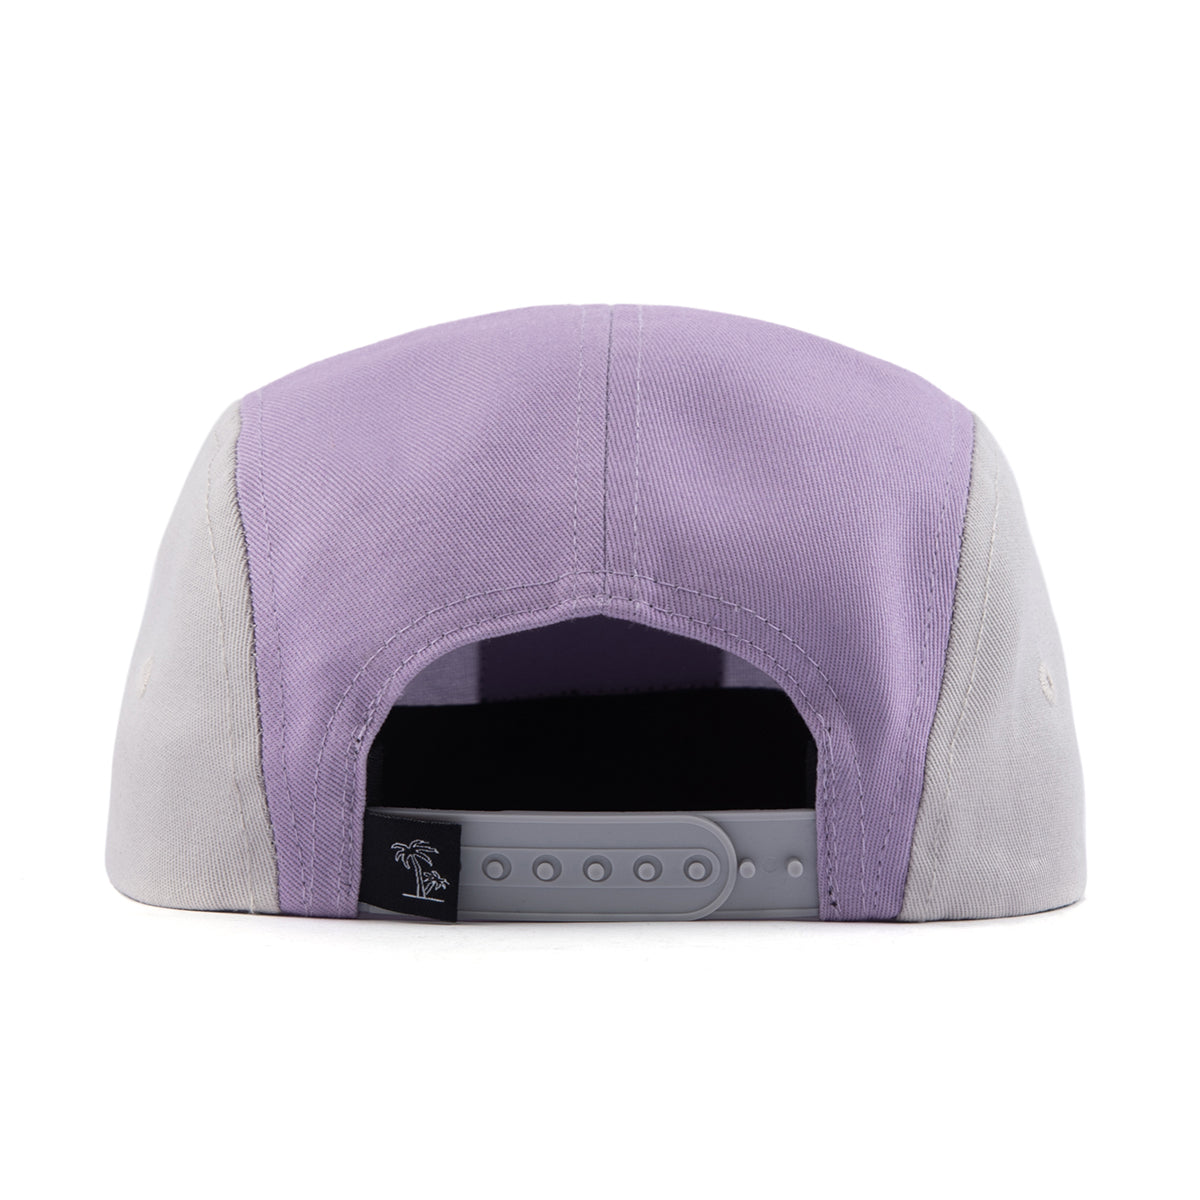 Retro Pink 5 Panel: Available in Baby - Adult Sizes - Cubs & Co.